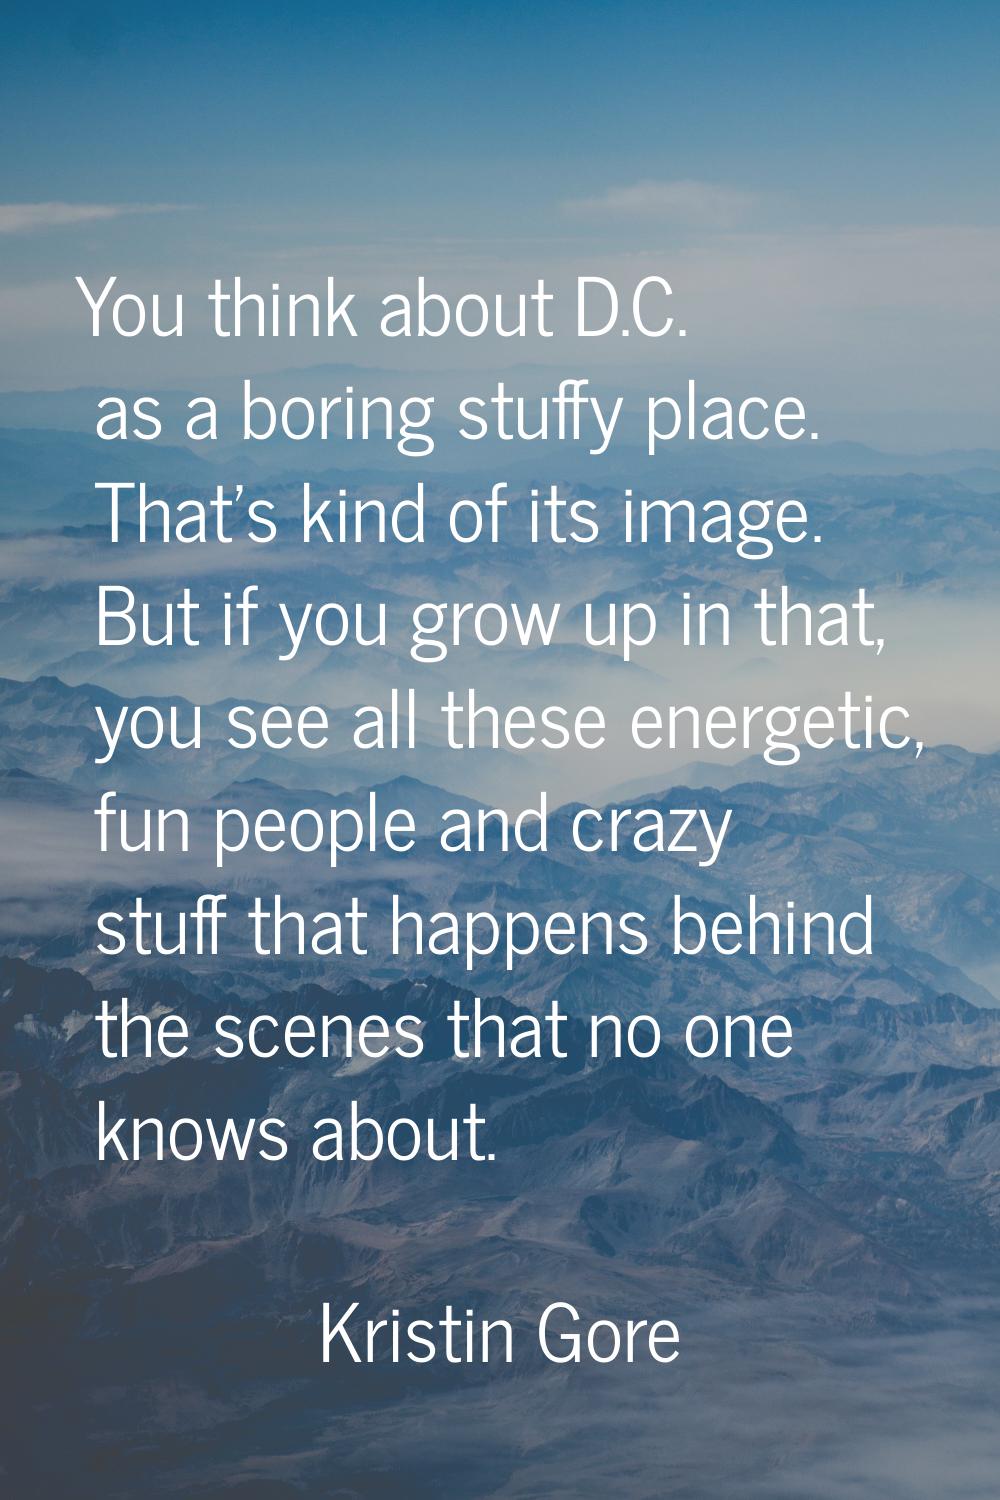 You think about D.C. as a boring stuffy place. That's kind of its image. But if you grow up in that